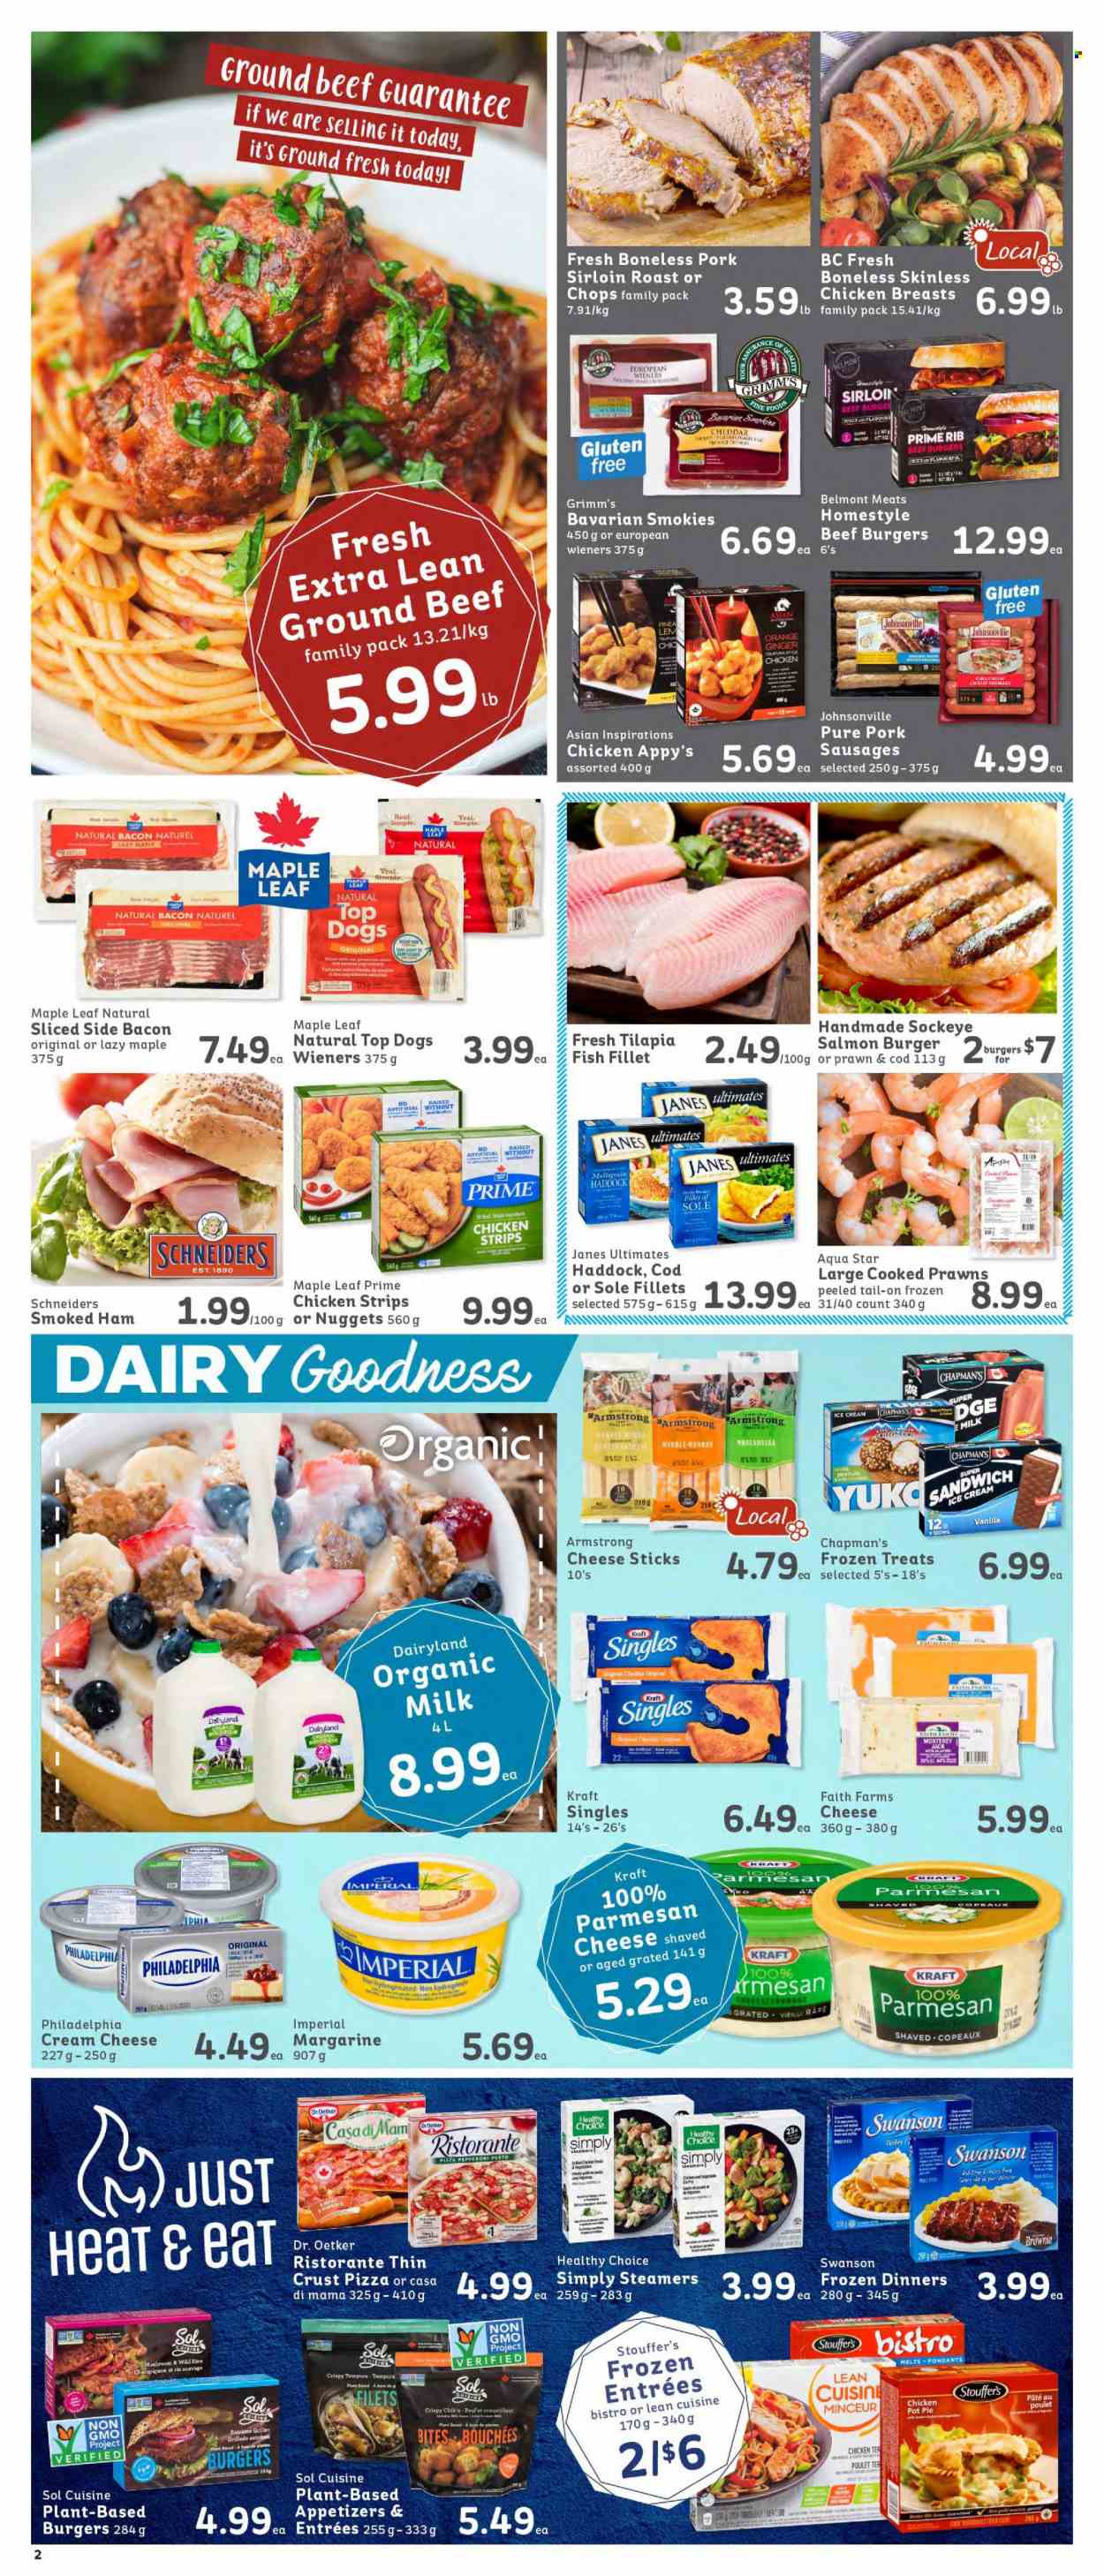 thumbnail - IGA Simple Goodness Flyer - October 22, 2021 - October 28, 2021 - Sales products - pie, pot pie, brownies, ginger, cod, fish fillets, salmon, tilapia, haddock, prawns, fish, pizza, sandwich, nuggets, hamburger, beef burger, Lean Cuisine, Healthy Choice, Kraft®, bacon, ham, smoked ham, Johnsonville, sausage, pepperoni, cream cheese, Monterey Jack cheese, sandwich slices, cheddar, parmesan, Dr. Oetker, Kraft Singles, organic milk, margarine, ice cream, strips, chicken strips, cheese sticks, Stouffer's, rice, peanuts, Sol, chicken breasts, beef meat, ground beef, pork loin, pesto, Philadelphia, oranges. Page 2.